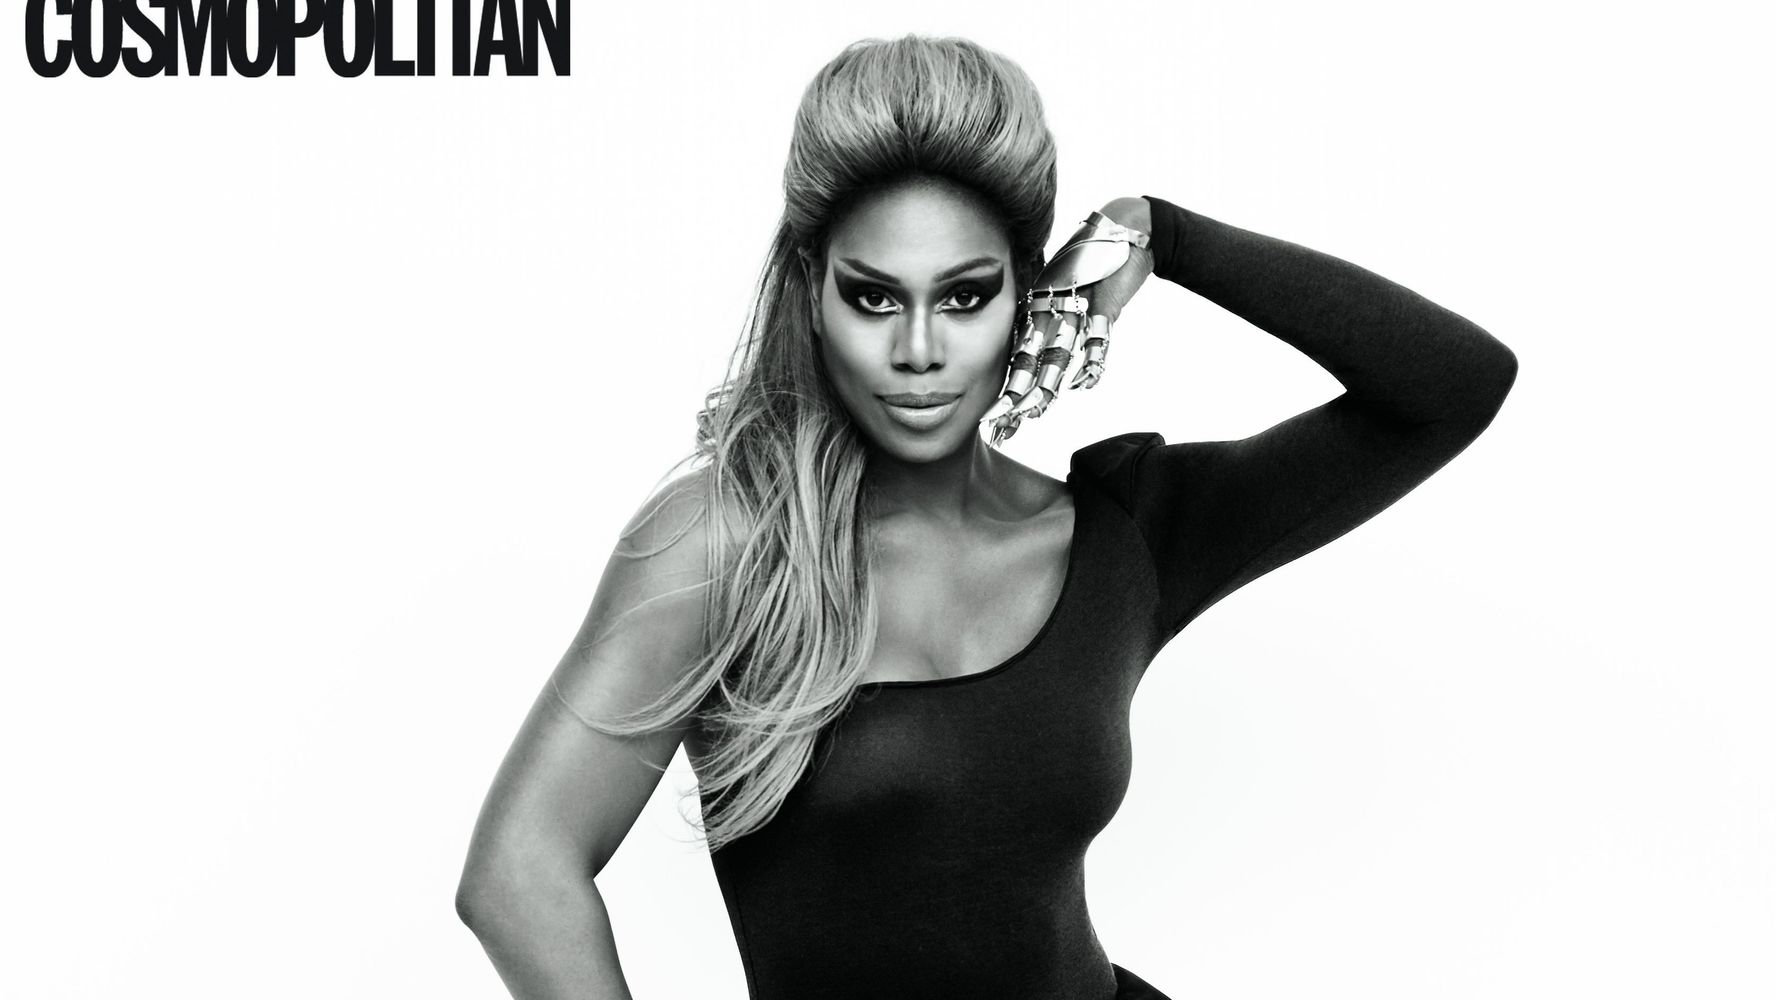 Laverne Cox Pays Tribute To Iconic Black Women In Beautiful Magazine Spread...